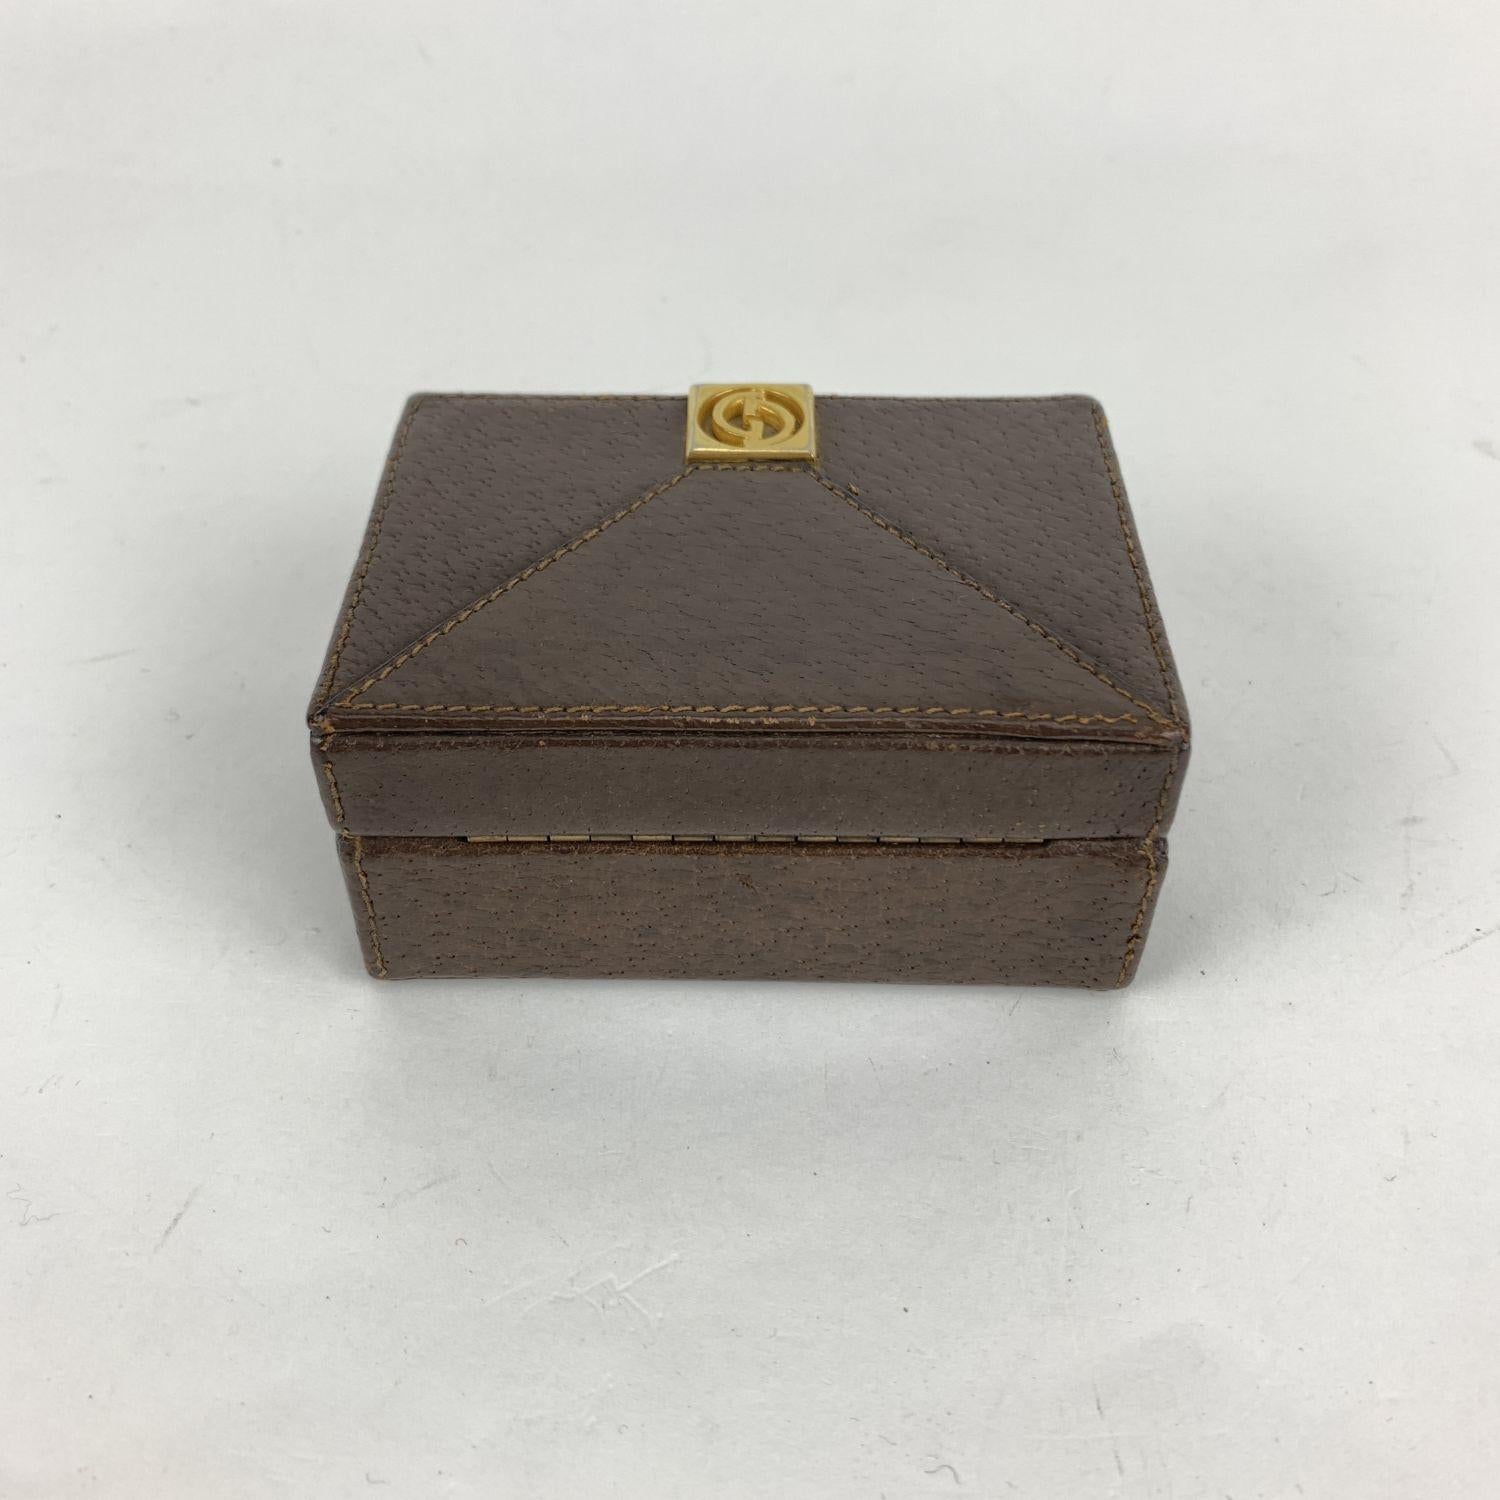 Gucci Vintage Brown Leather Small Jewelry Trinket Box 1